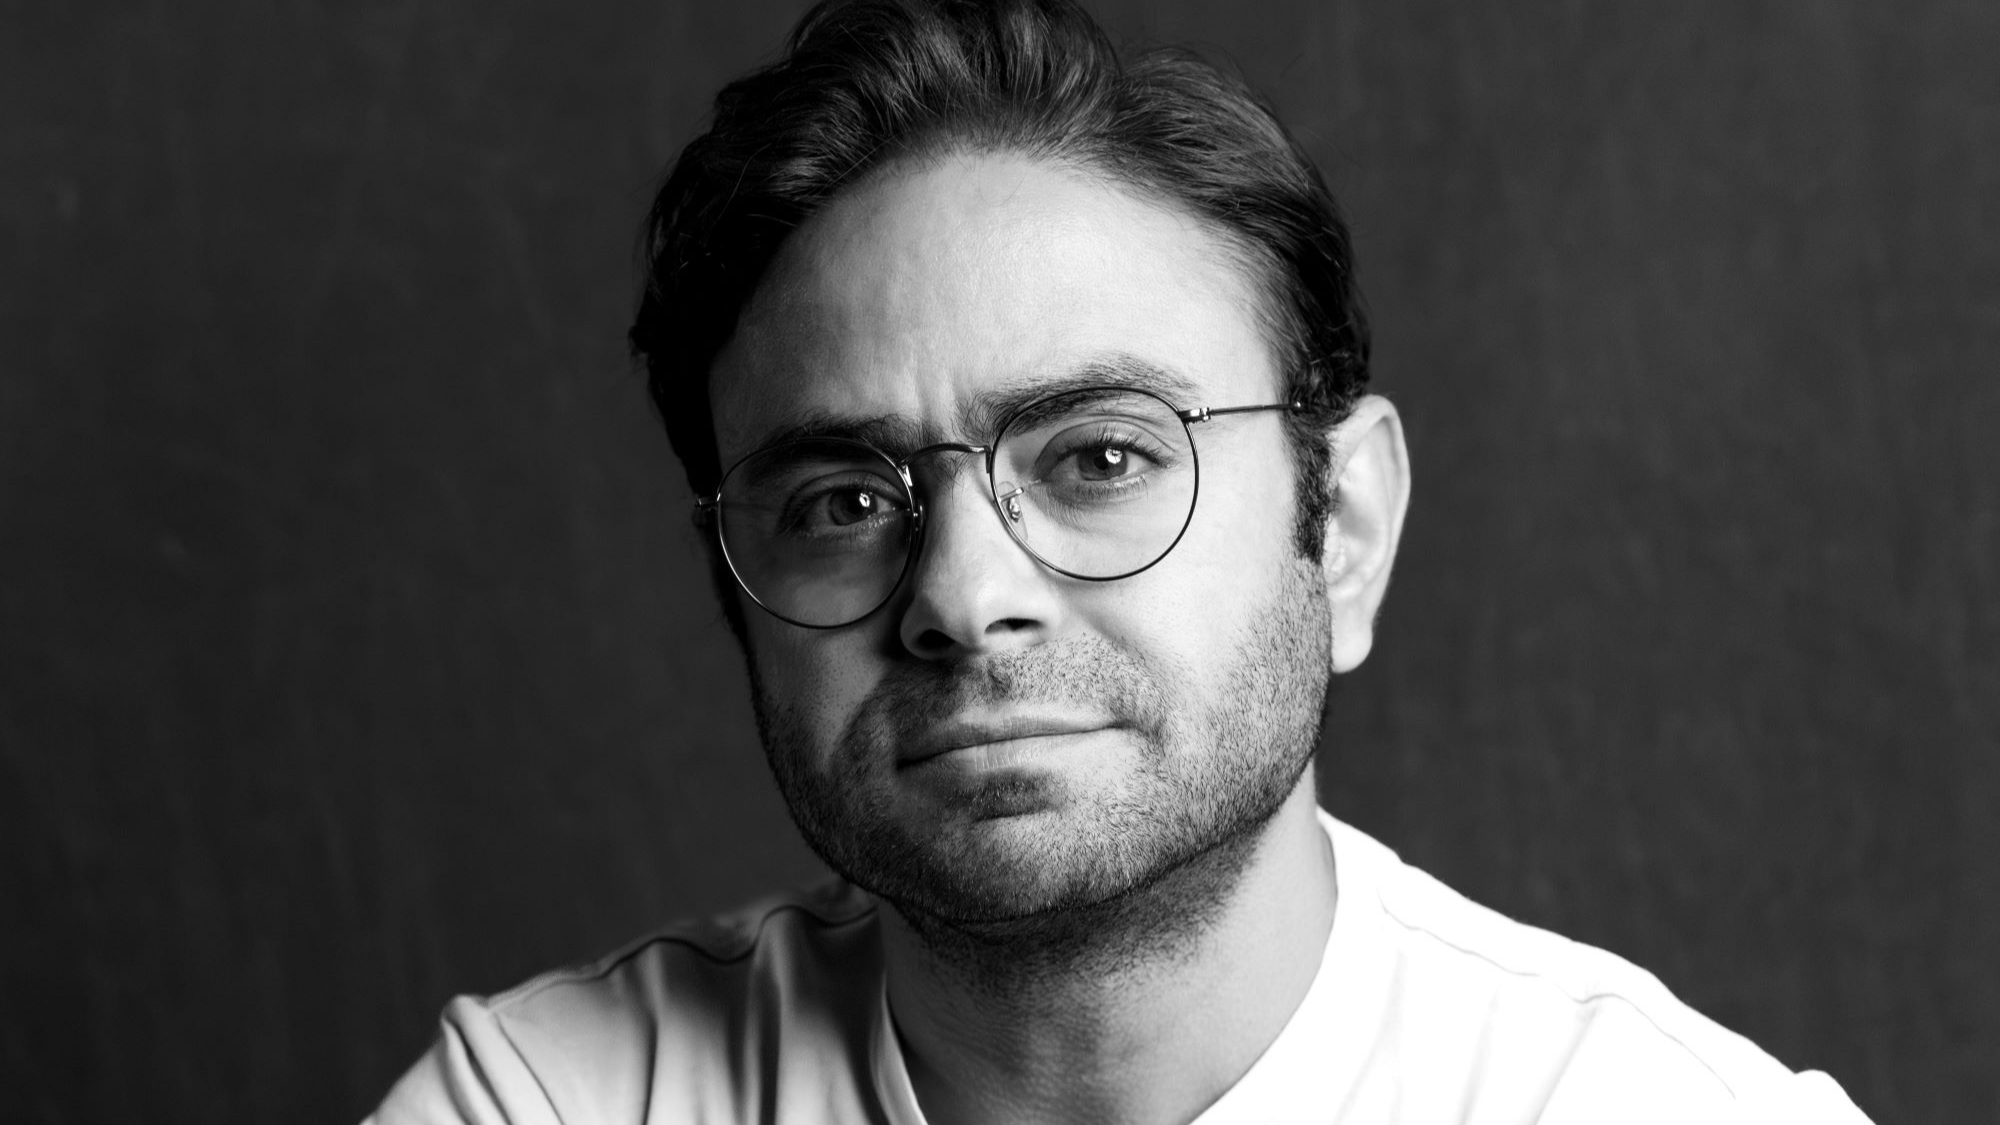 https://adgully.me/post/5427/ahmed-younis-joins-publicis-groupe-me-as-chief-creative-officer-for-publicis-ksa